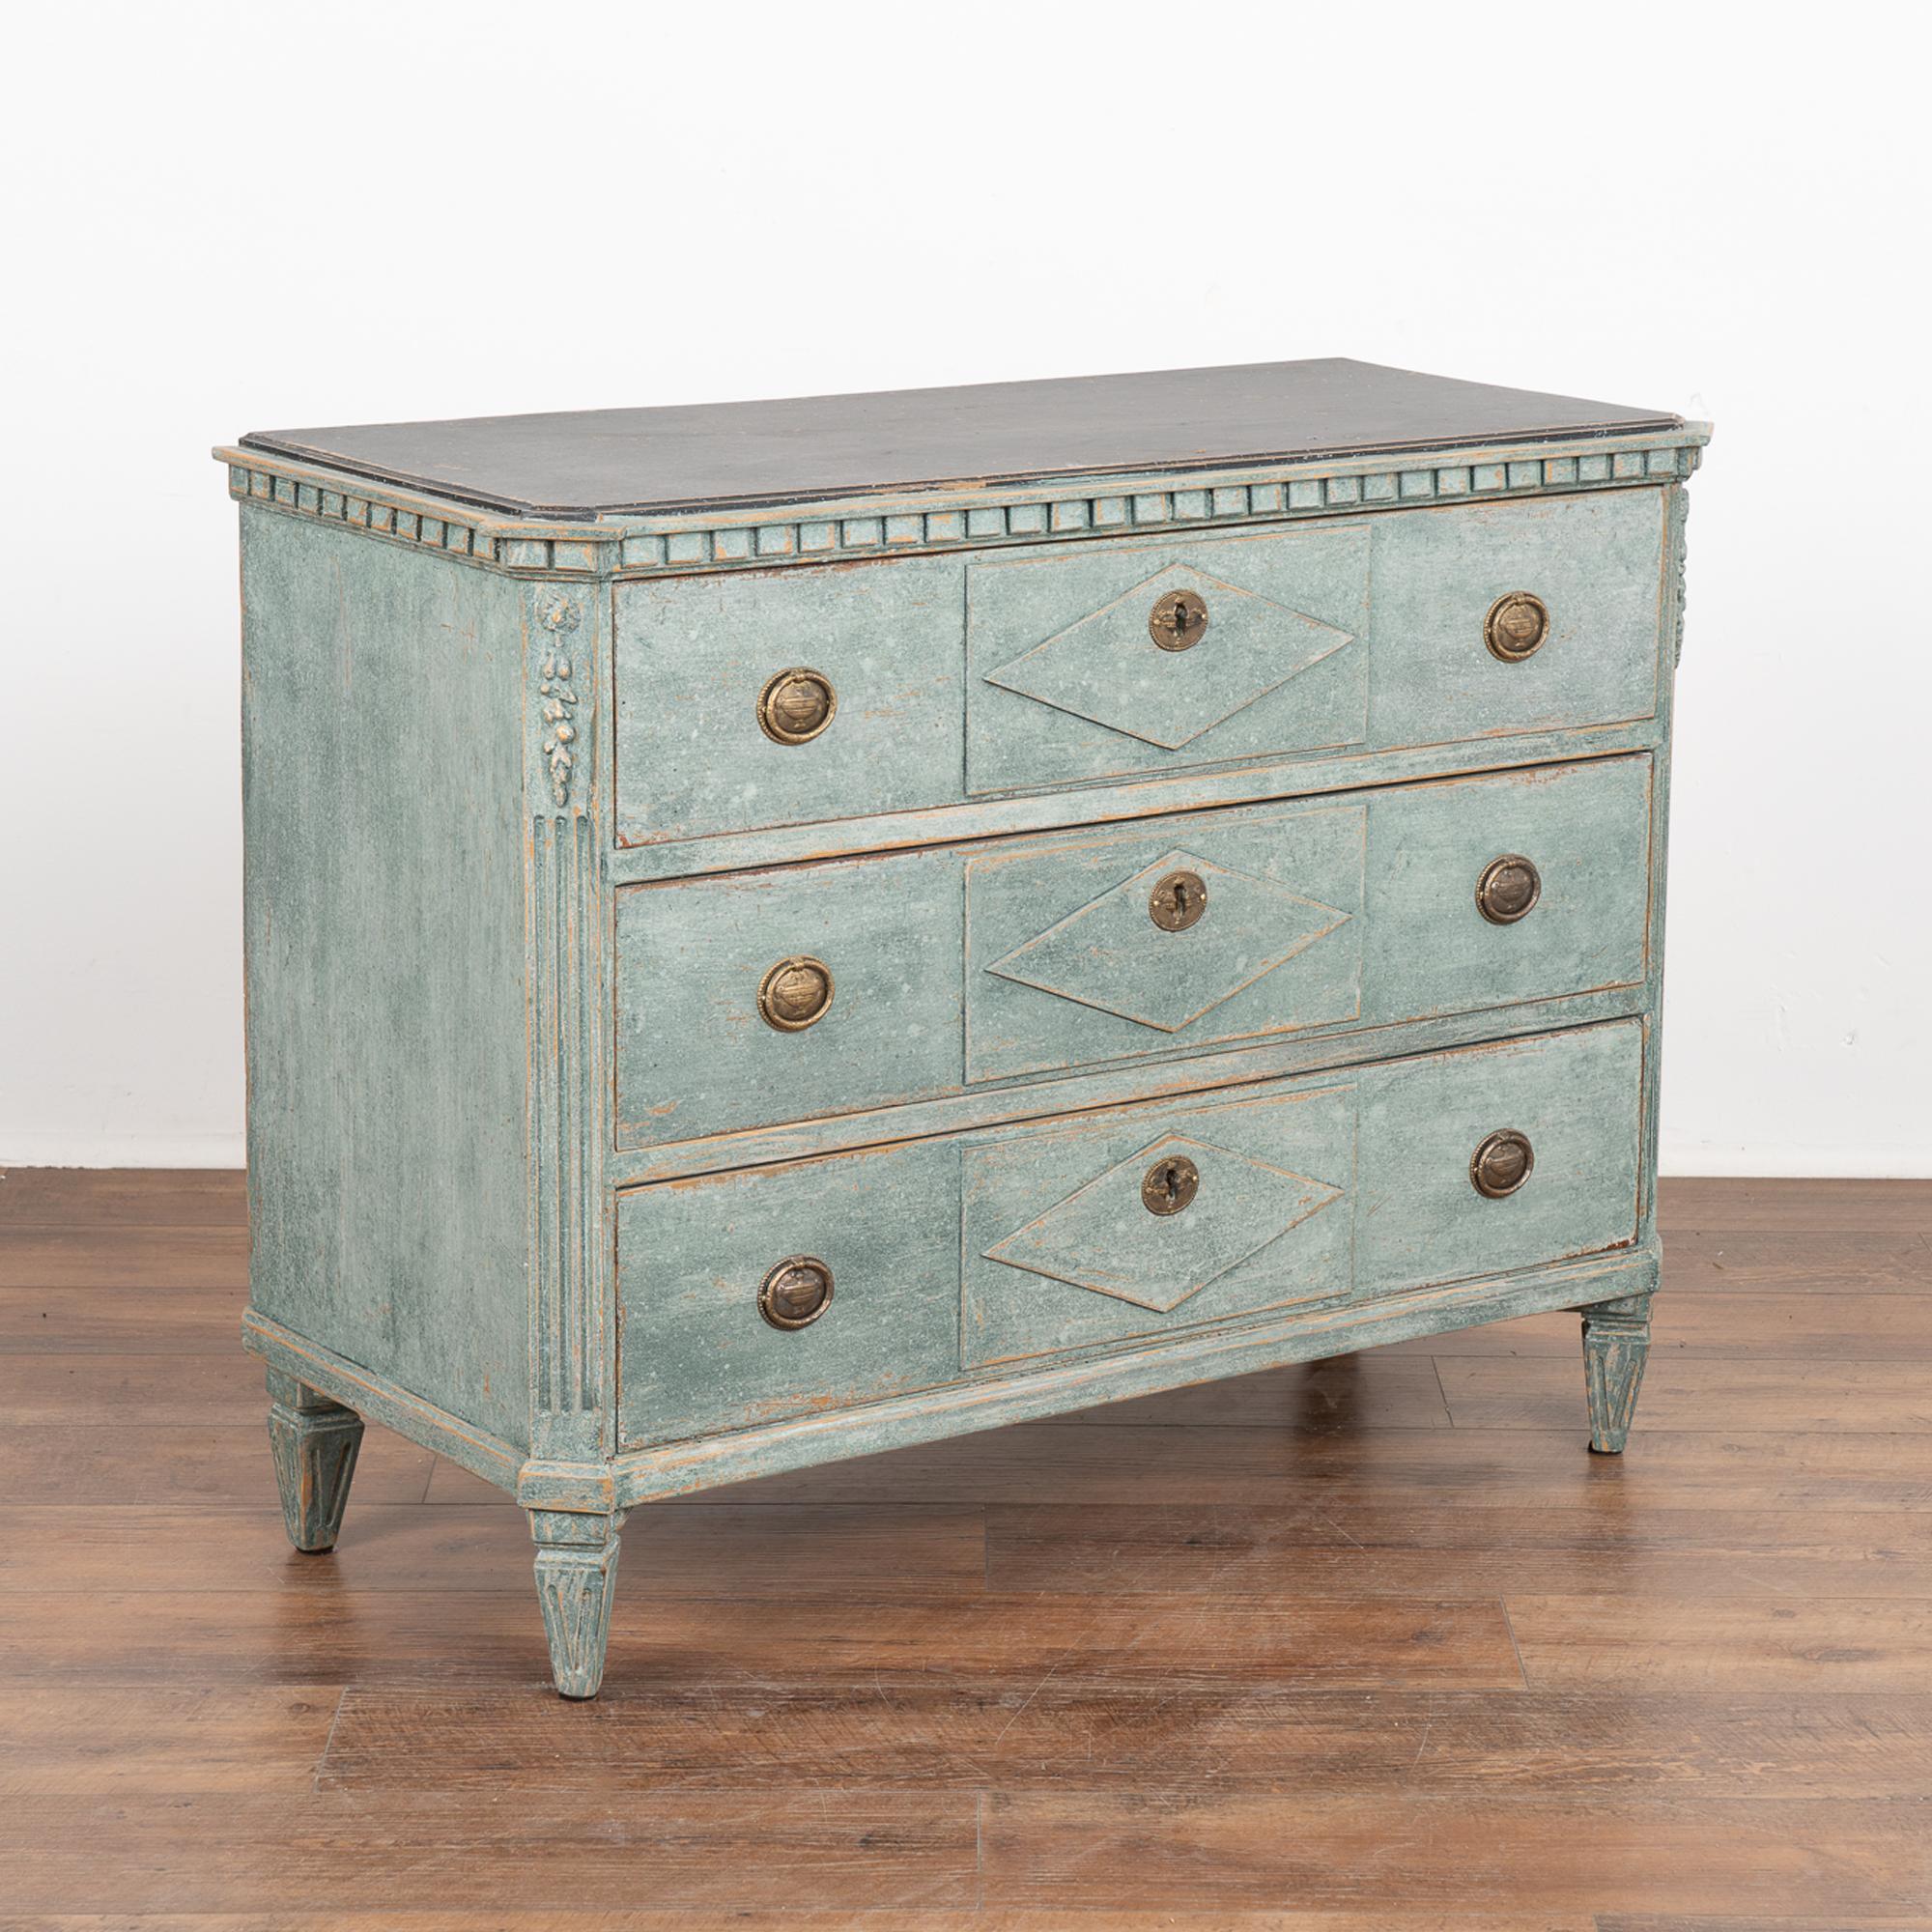 This lovely Gustavian pine chest of drawers has the simple yet elegant lines that reveal its Swedish country style.
The carved dentil molding along top, canted fluted side details and gently tapered fluted feet were traditional style elements of the